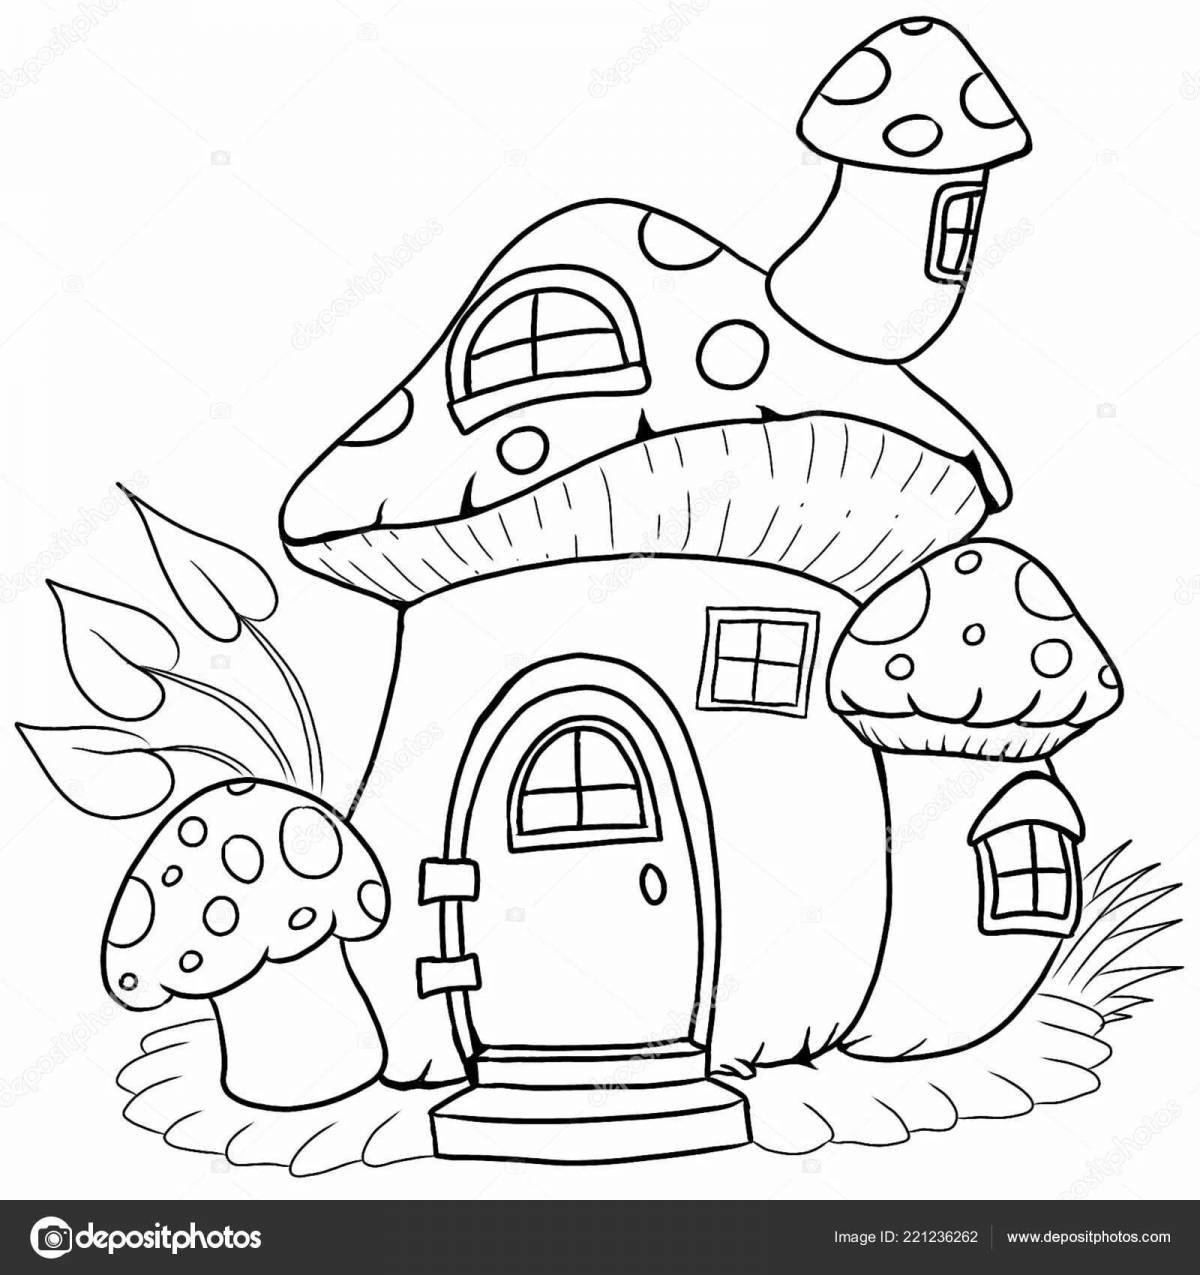 Glitter house coloring book for 4-5 year olds